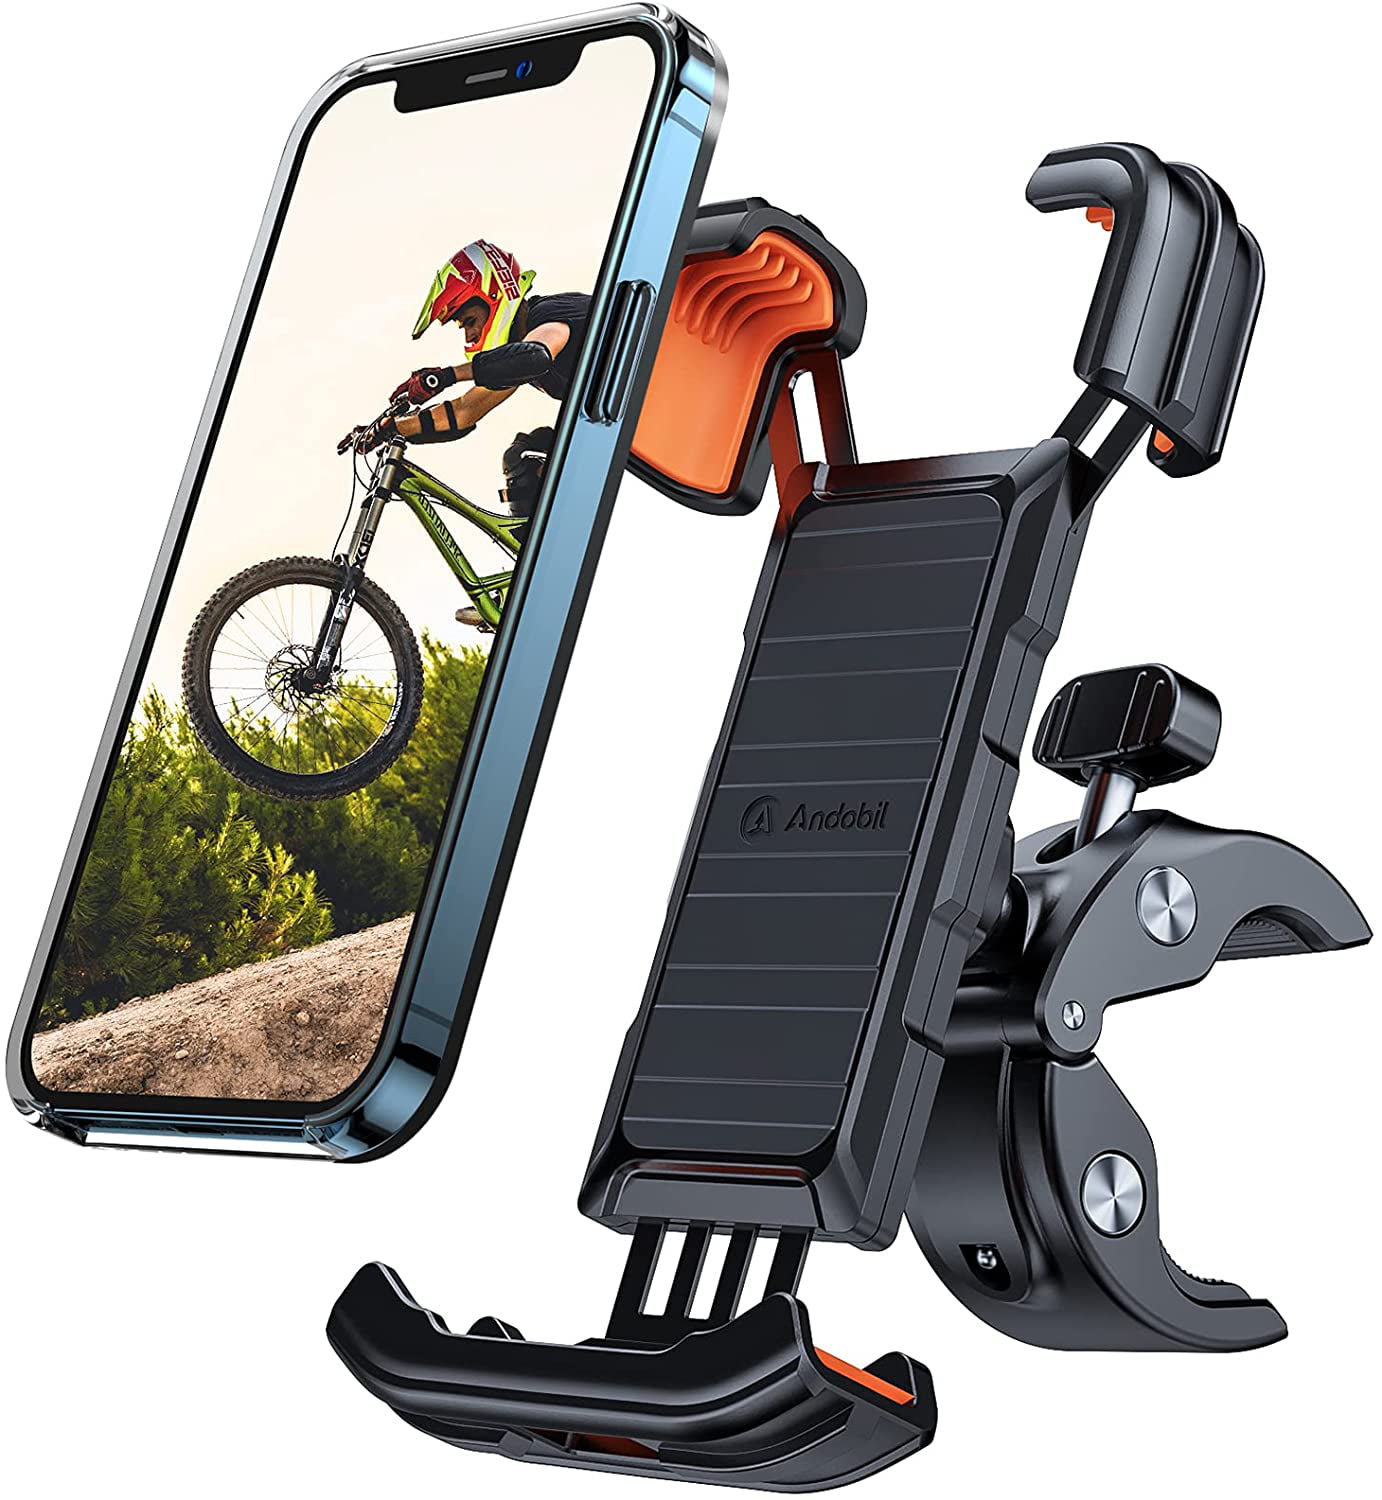 Galaxy S9 Folding Motorcycle Phone Holder Aluminum Universal Cell Phone Bicycle Stand for iPhone 12 / iPhone 12 Pro Max Note 20 and More 4.7-6.8 Cellphone Bike Phone Mount 2.3-3.35 Wide S1 